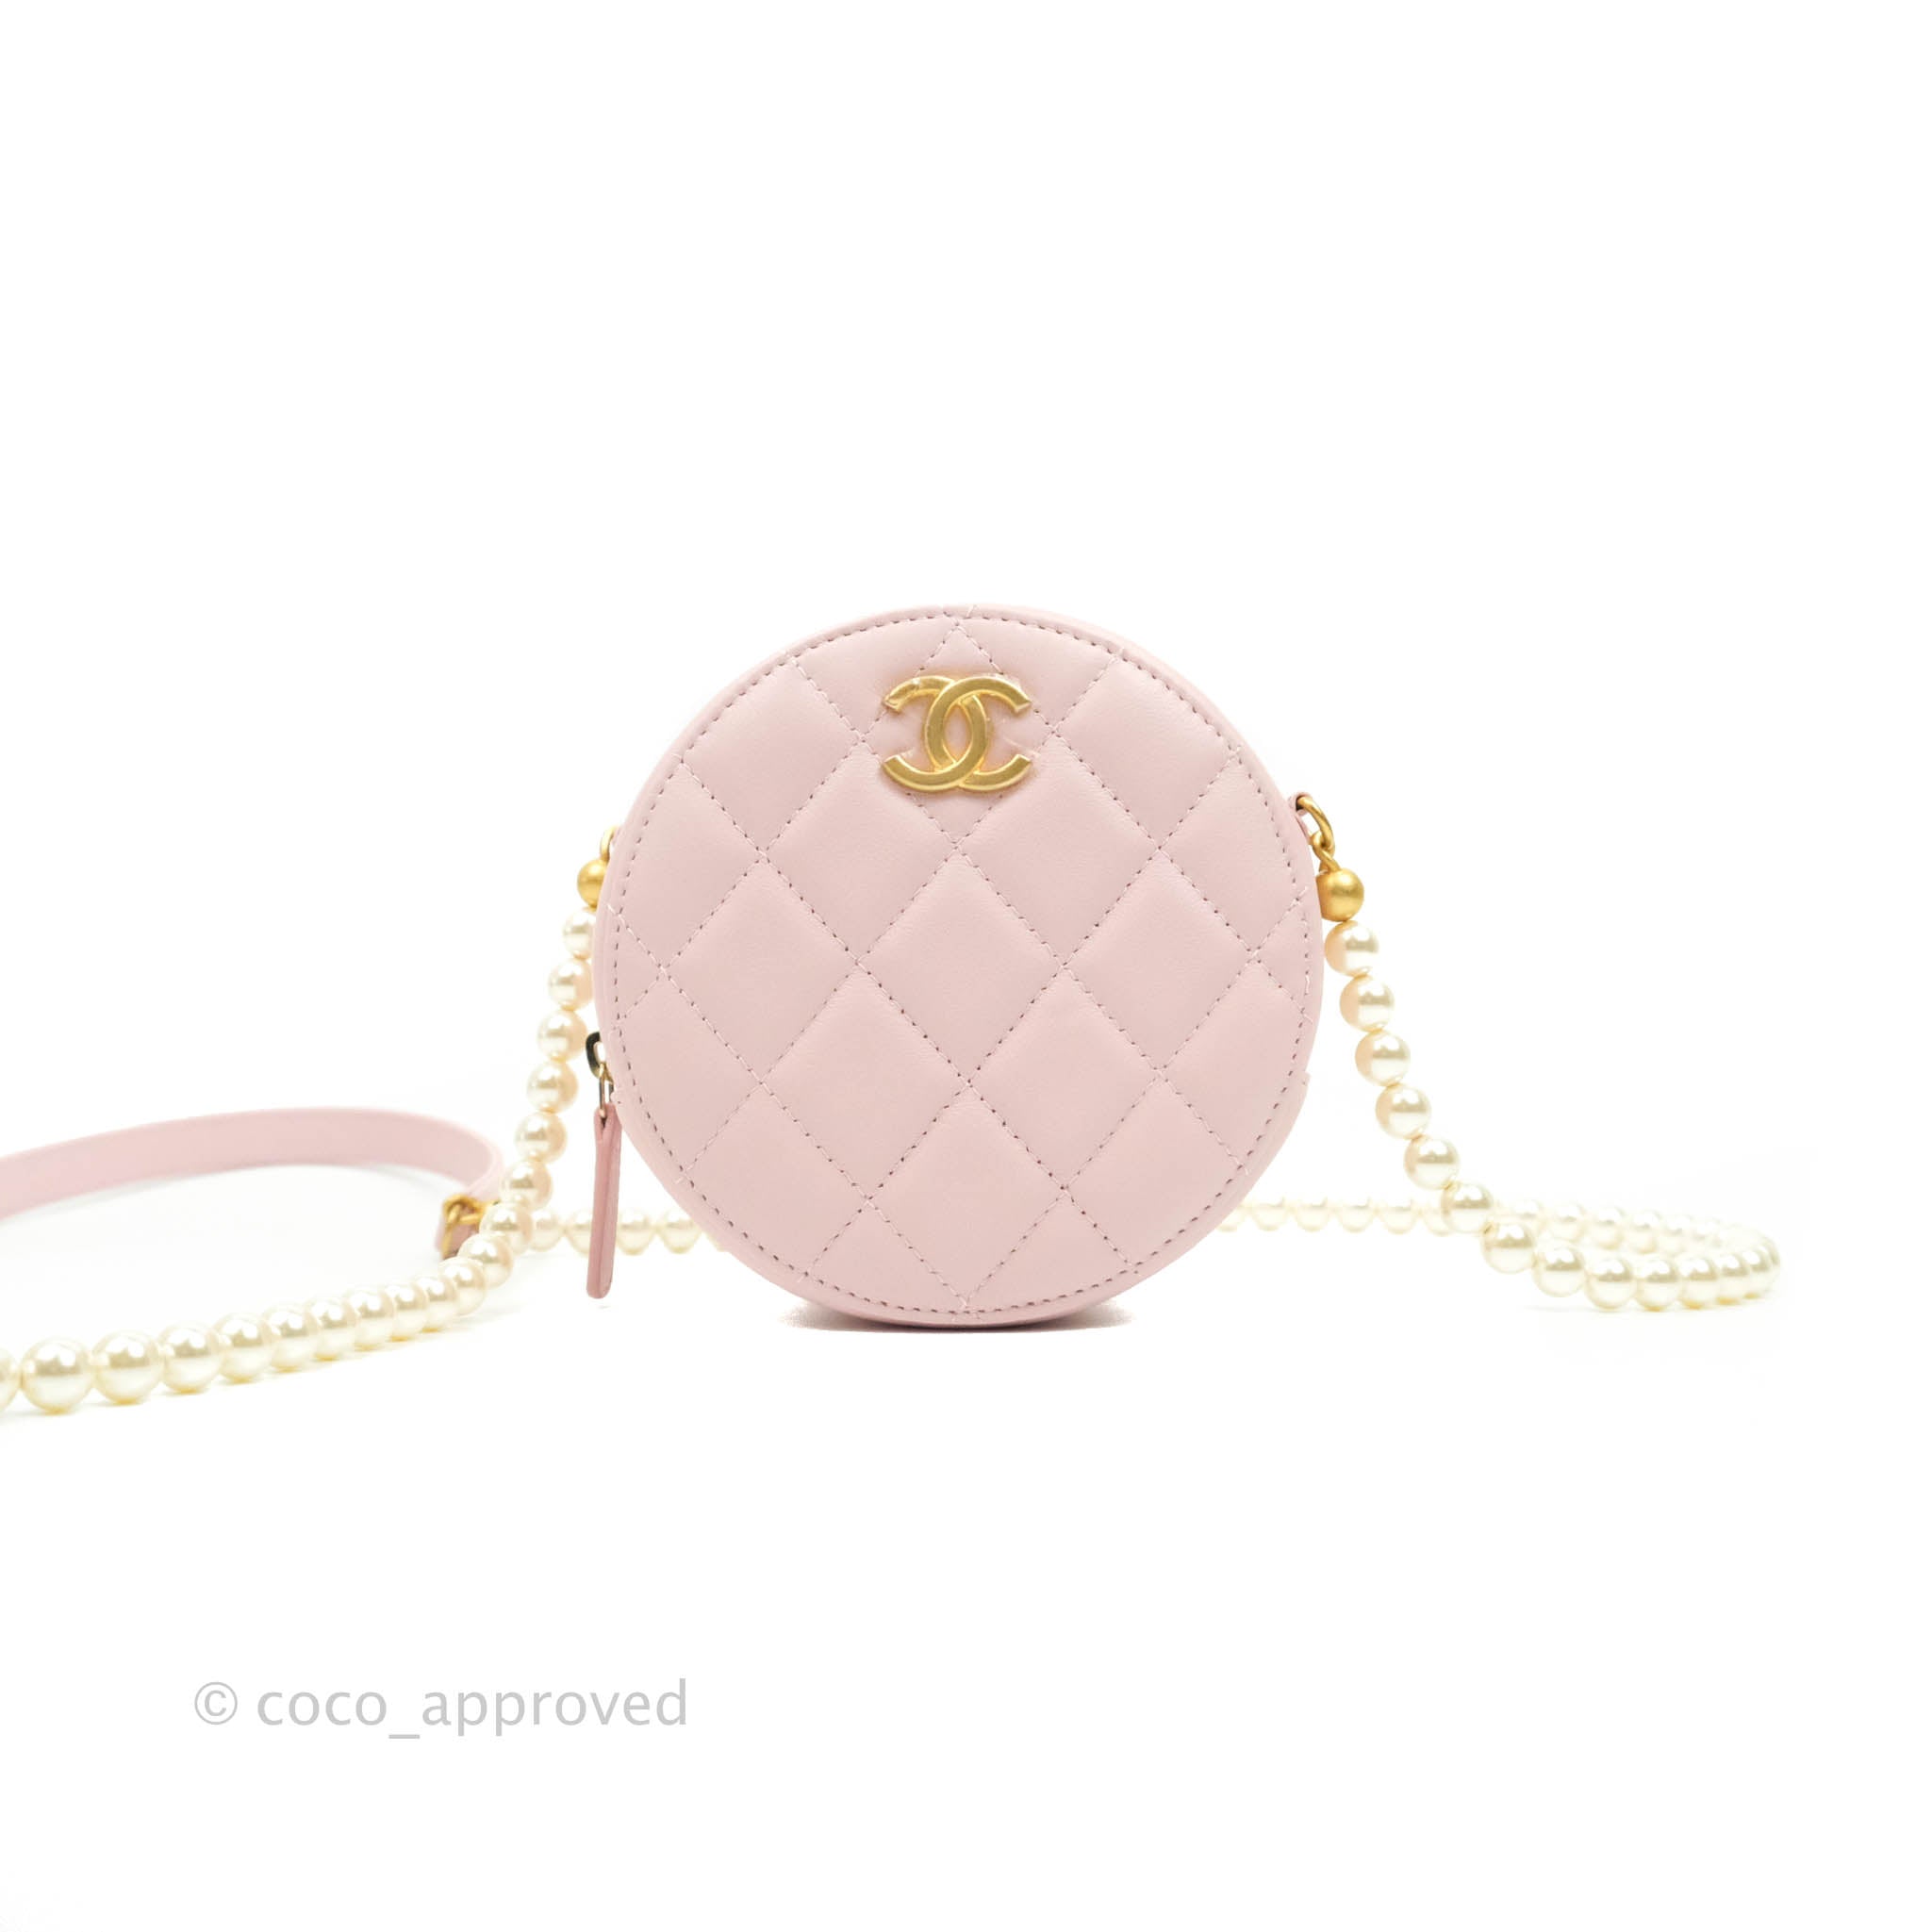 The New Chanel Round Clutch with Chain - PurseBop